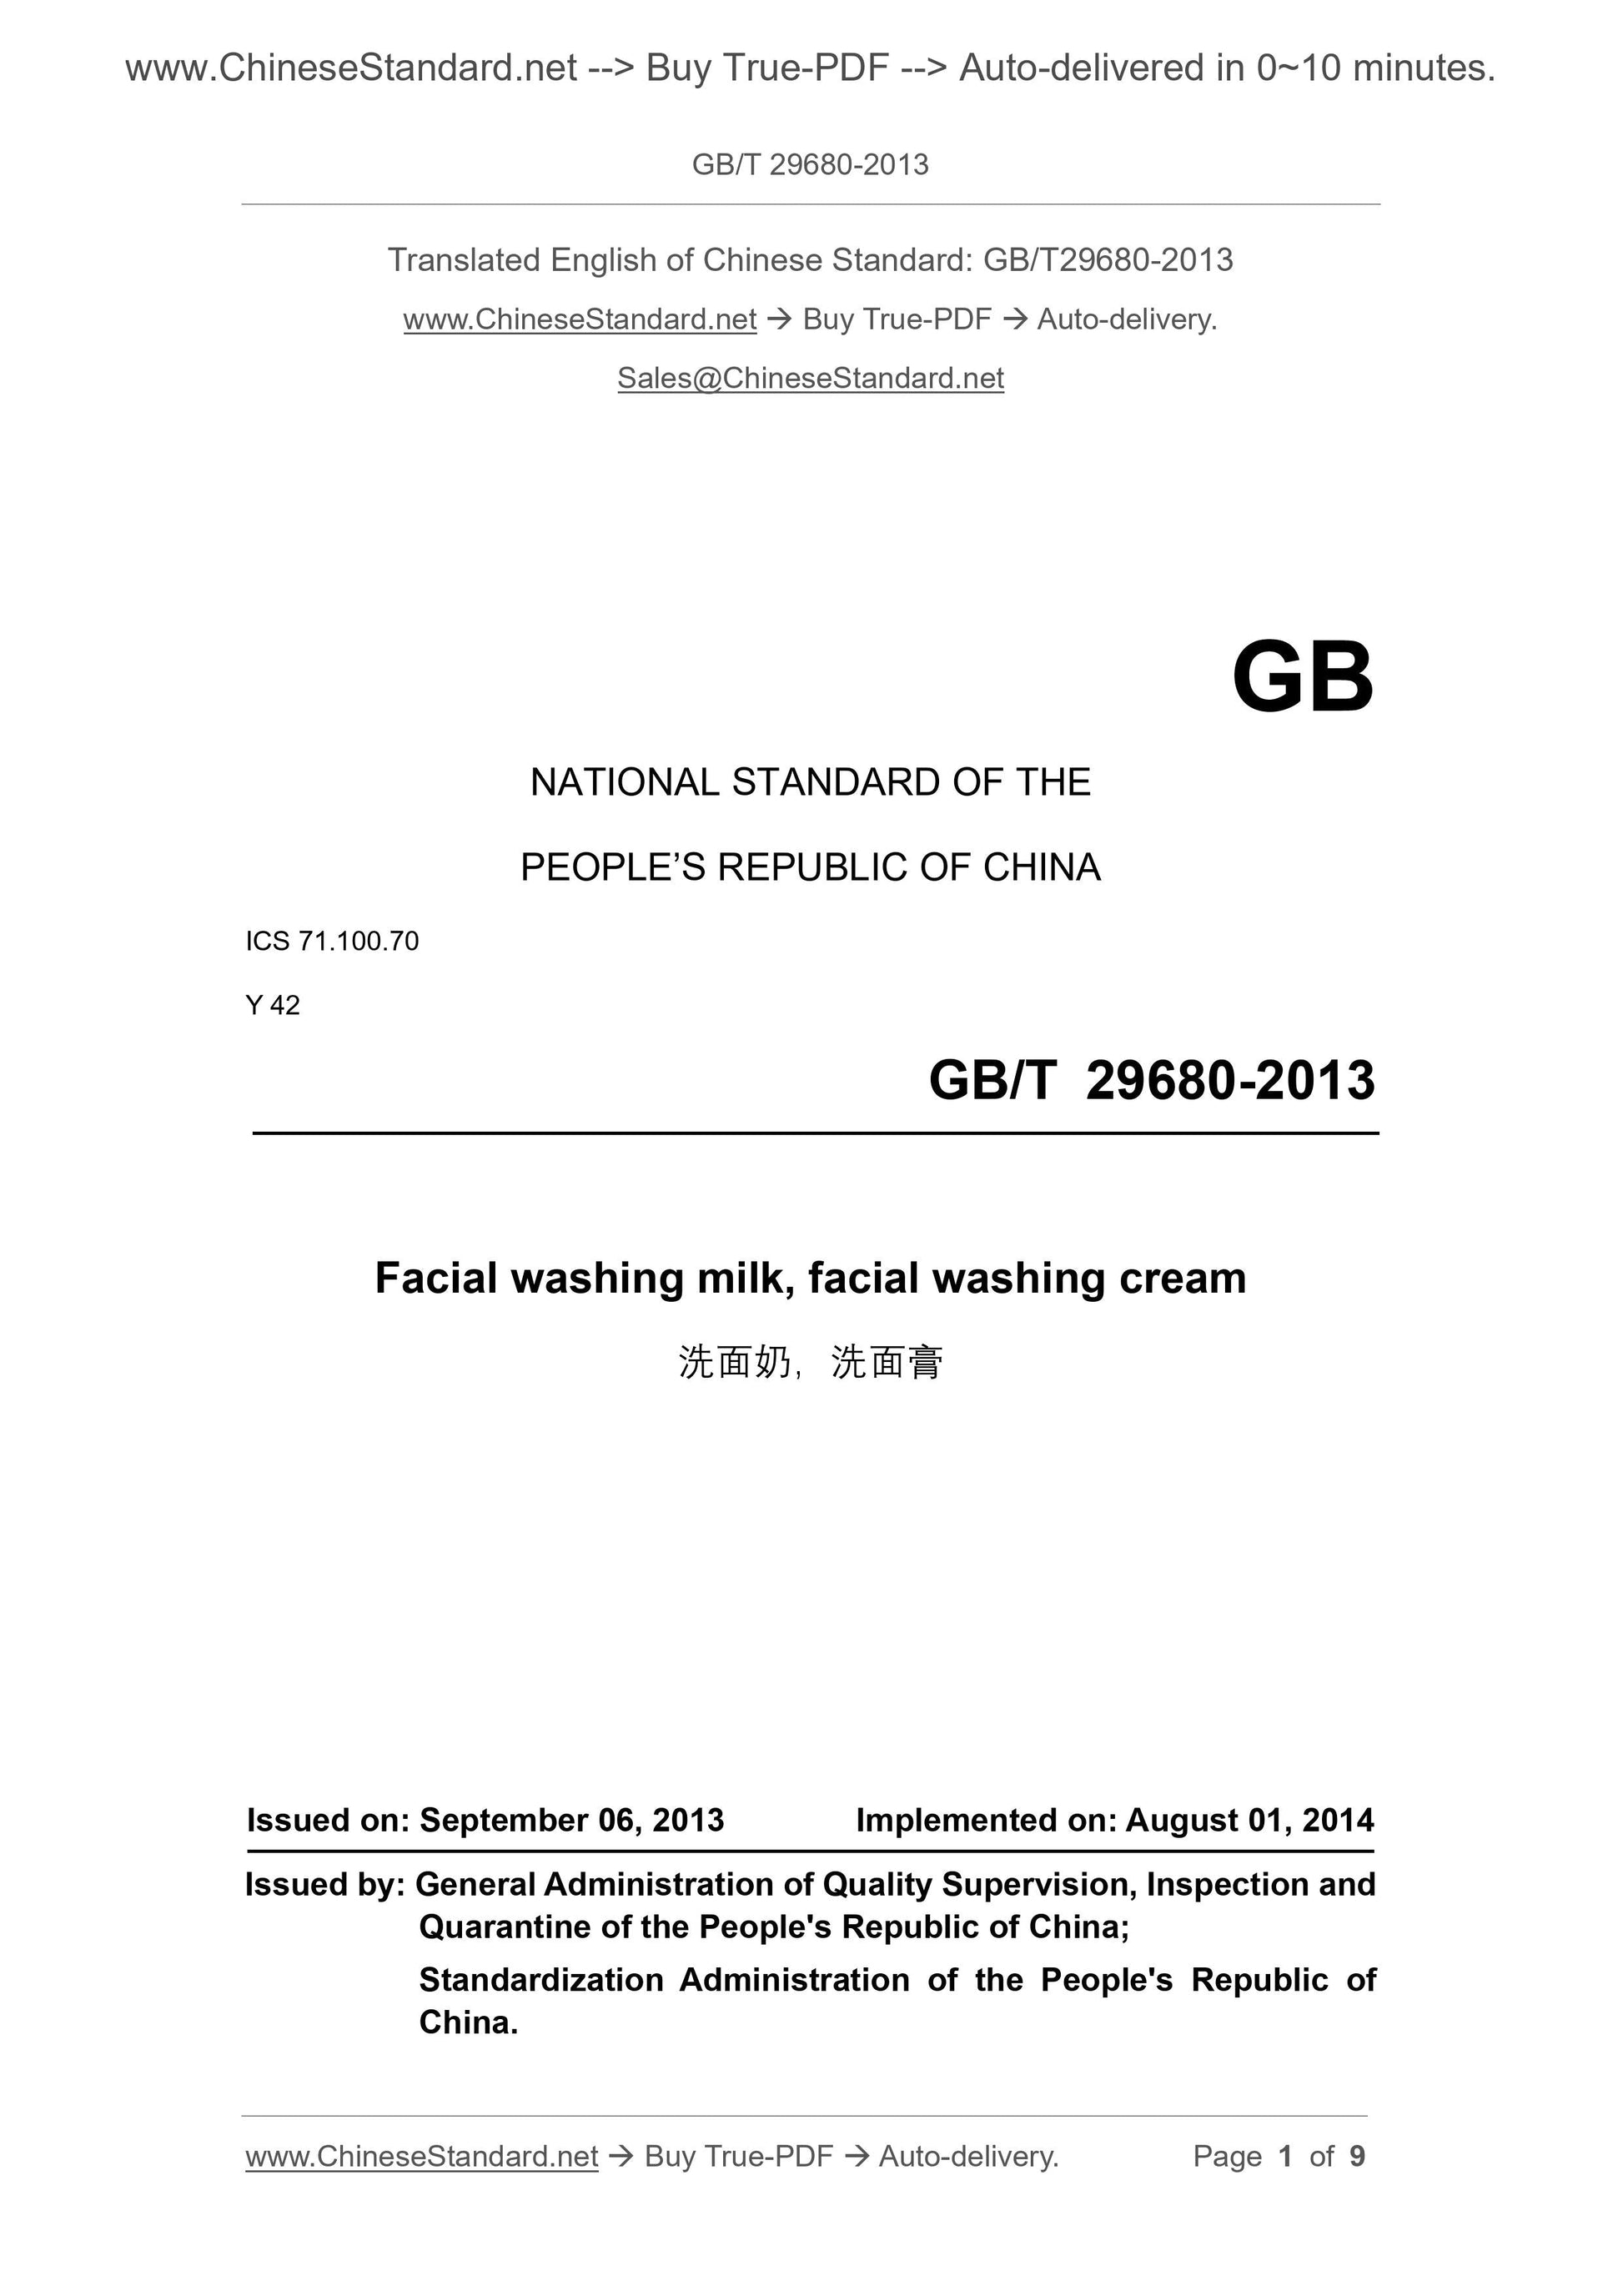 GB/T 29680-2013 Page 1